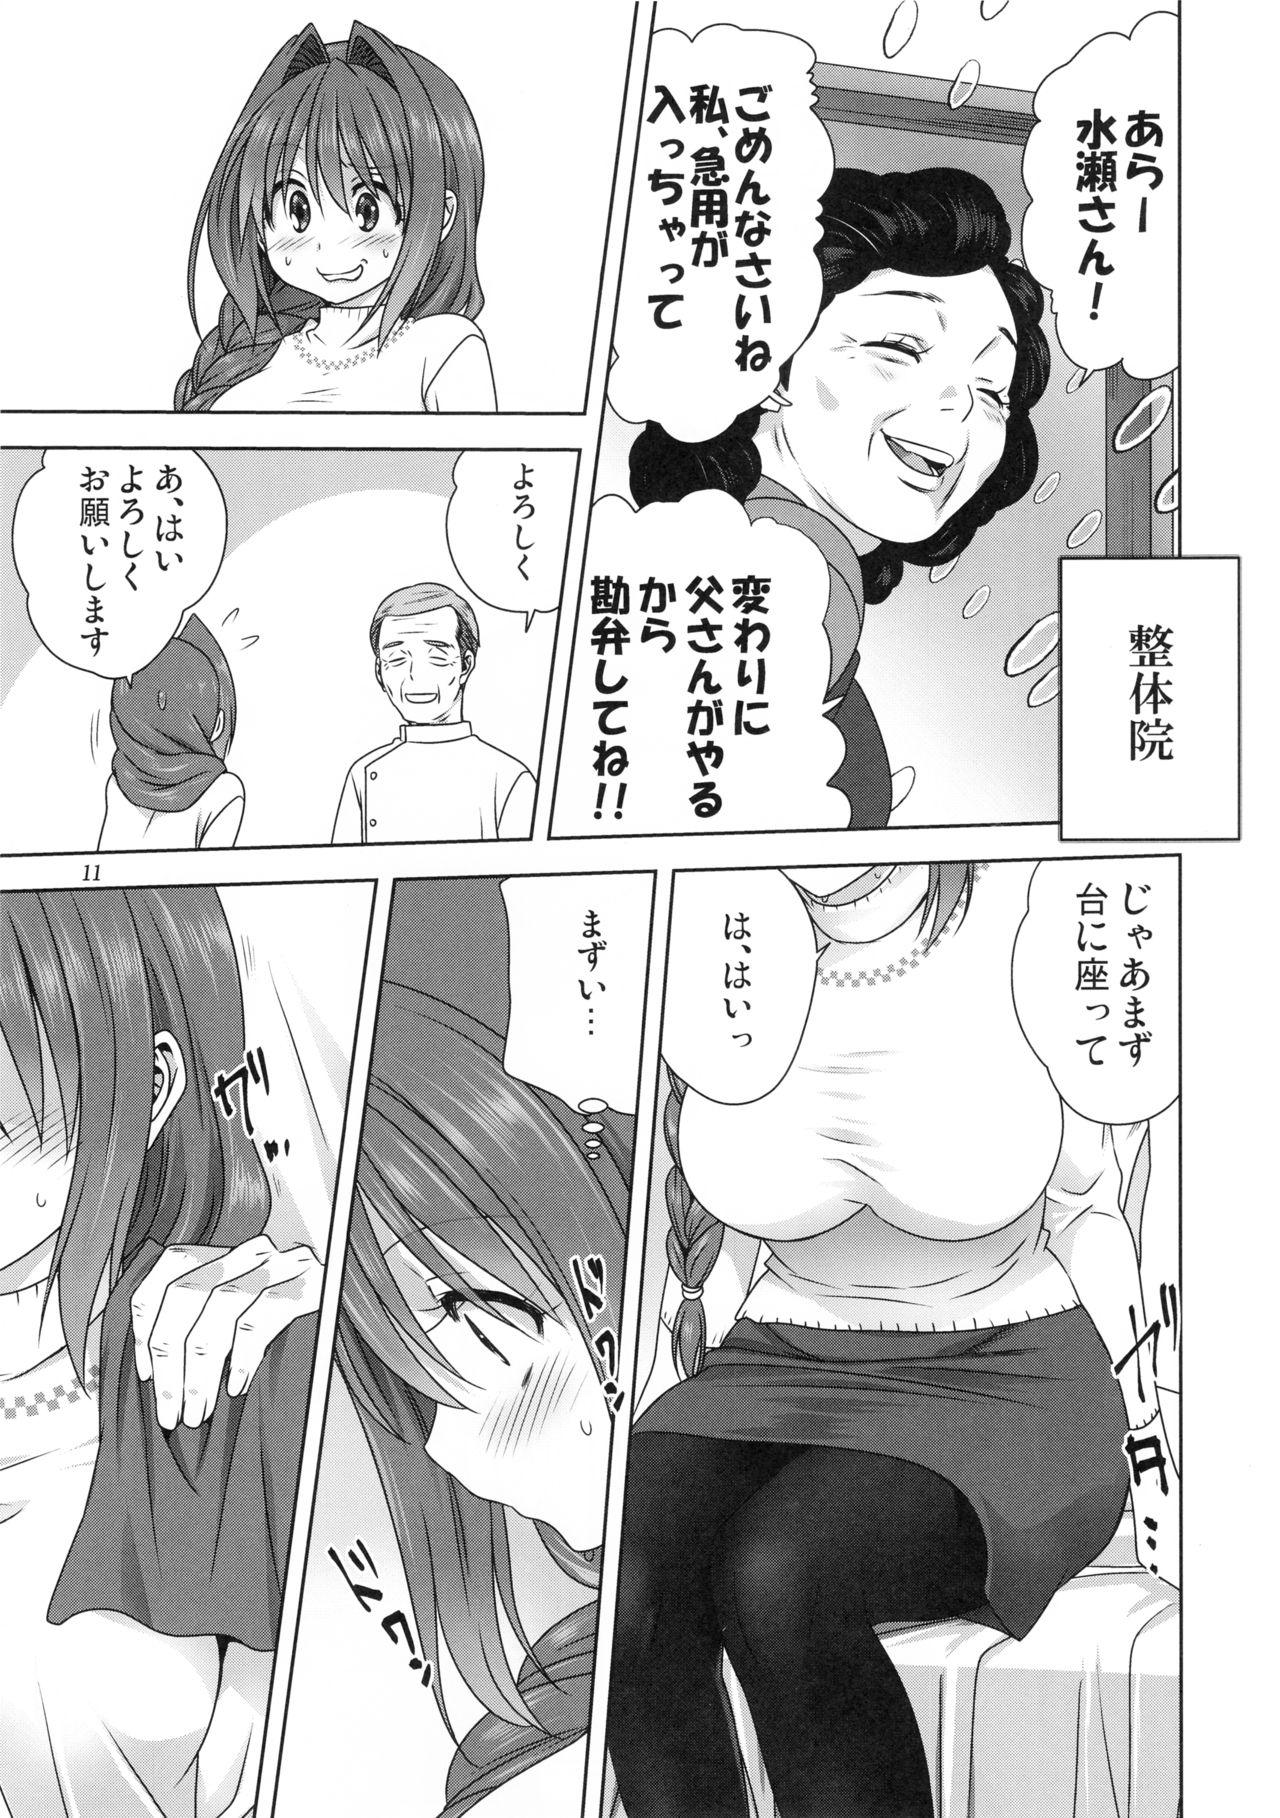 Cum Inside Akiko-san to Issho 23 - Kanon Butts - Page 10